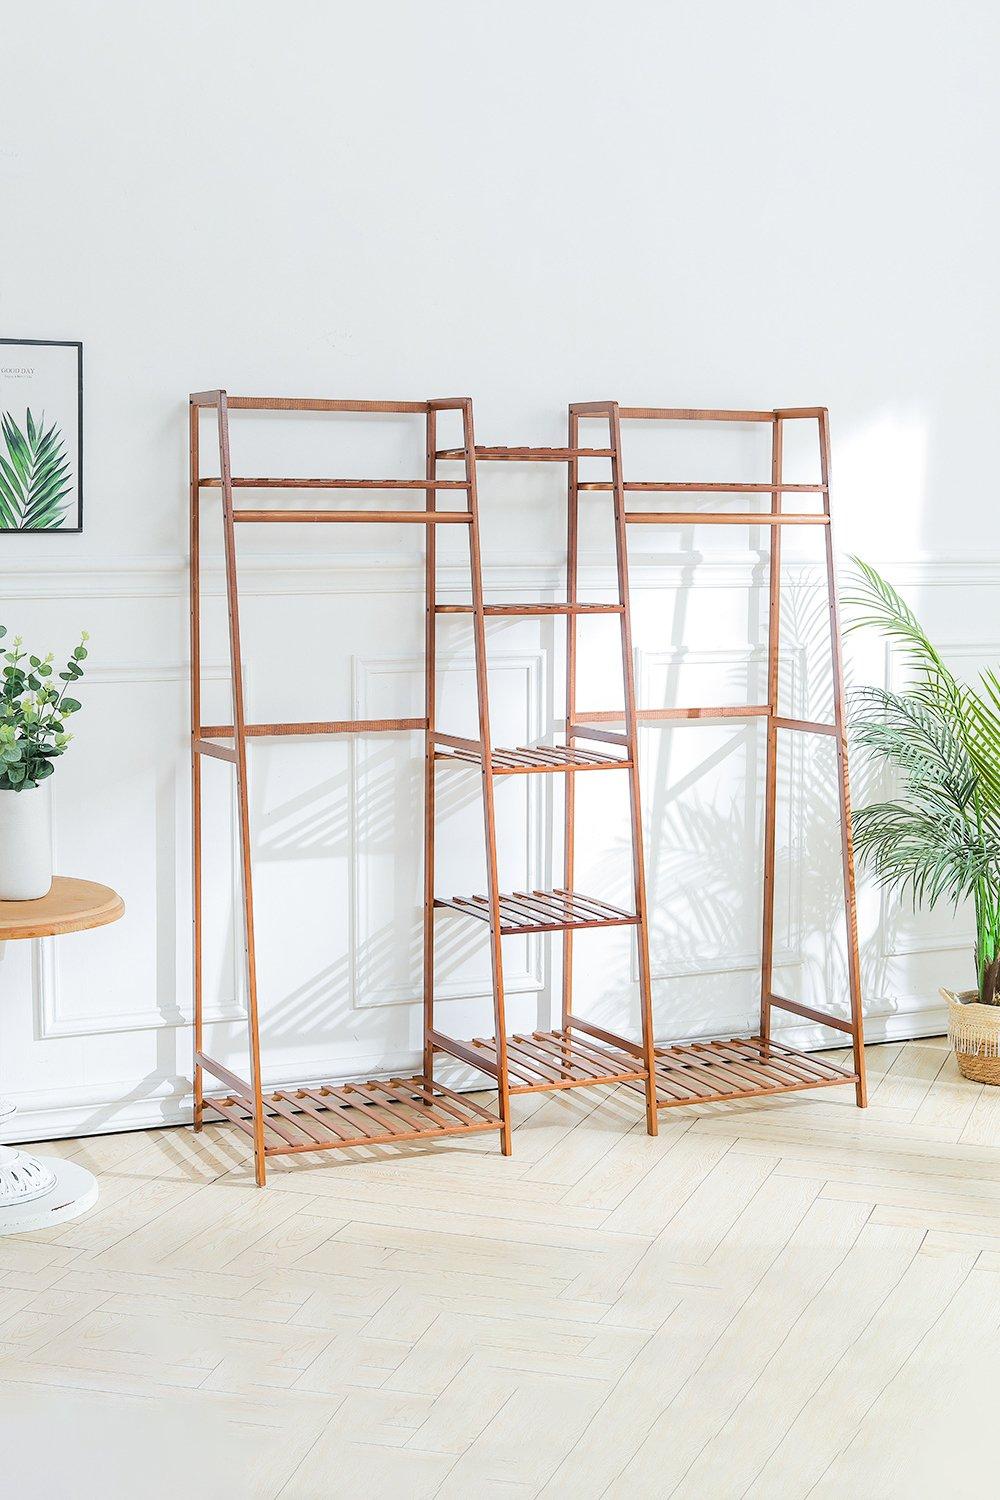 Multi-Functional Clothes Hanging Rack Stand